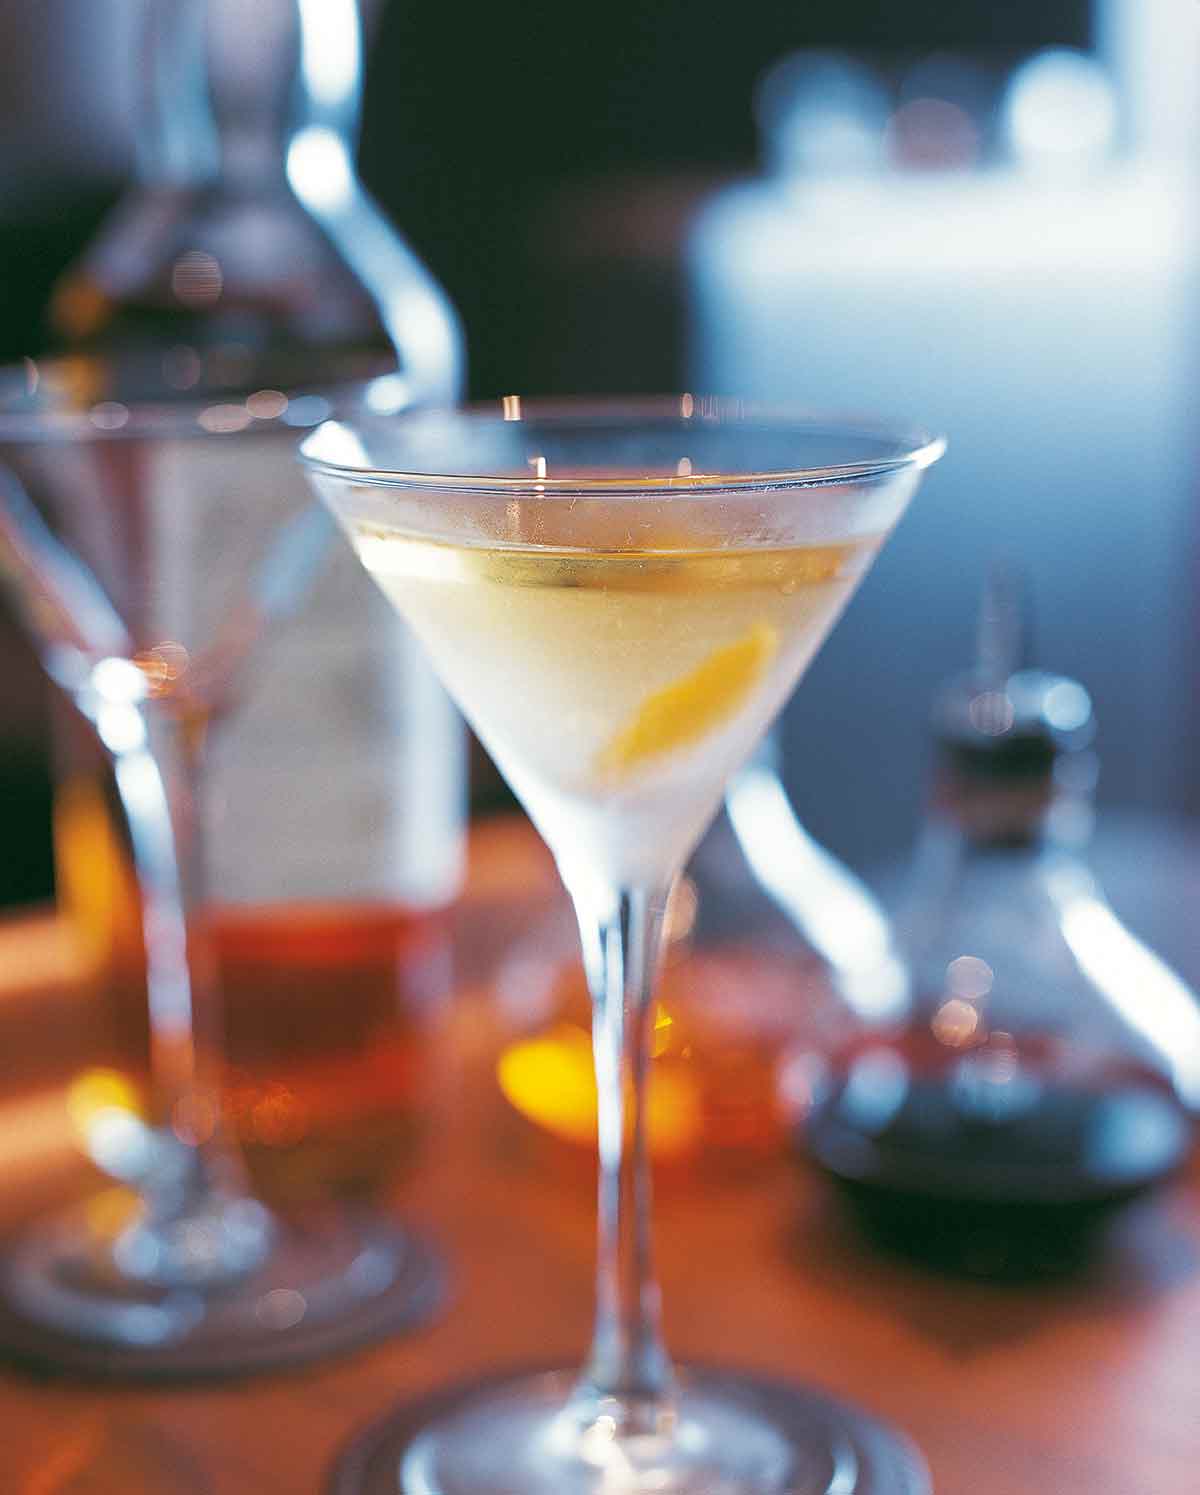 A stemmed cocktail glass on a bar filled with a smoky martini.